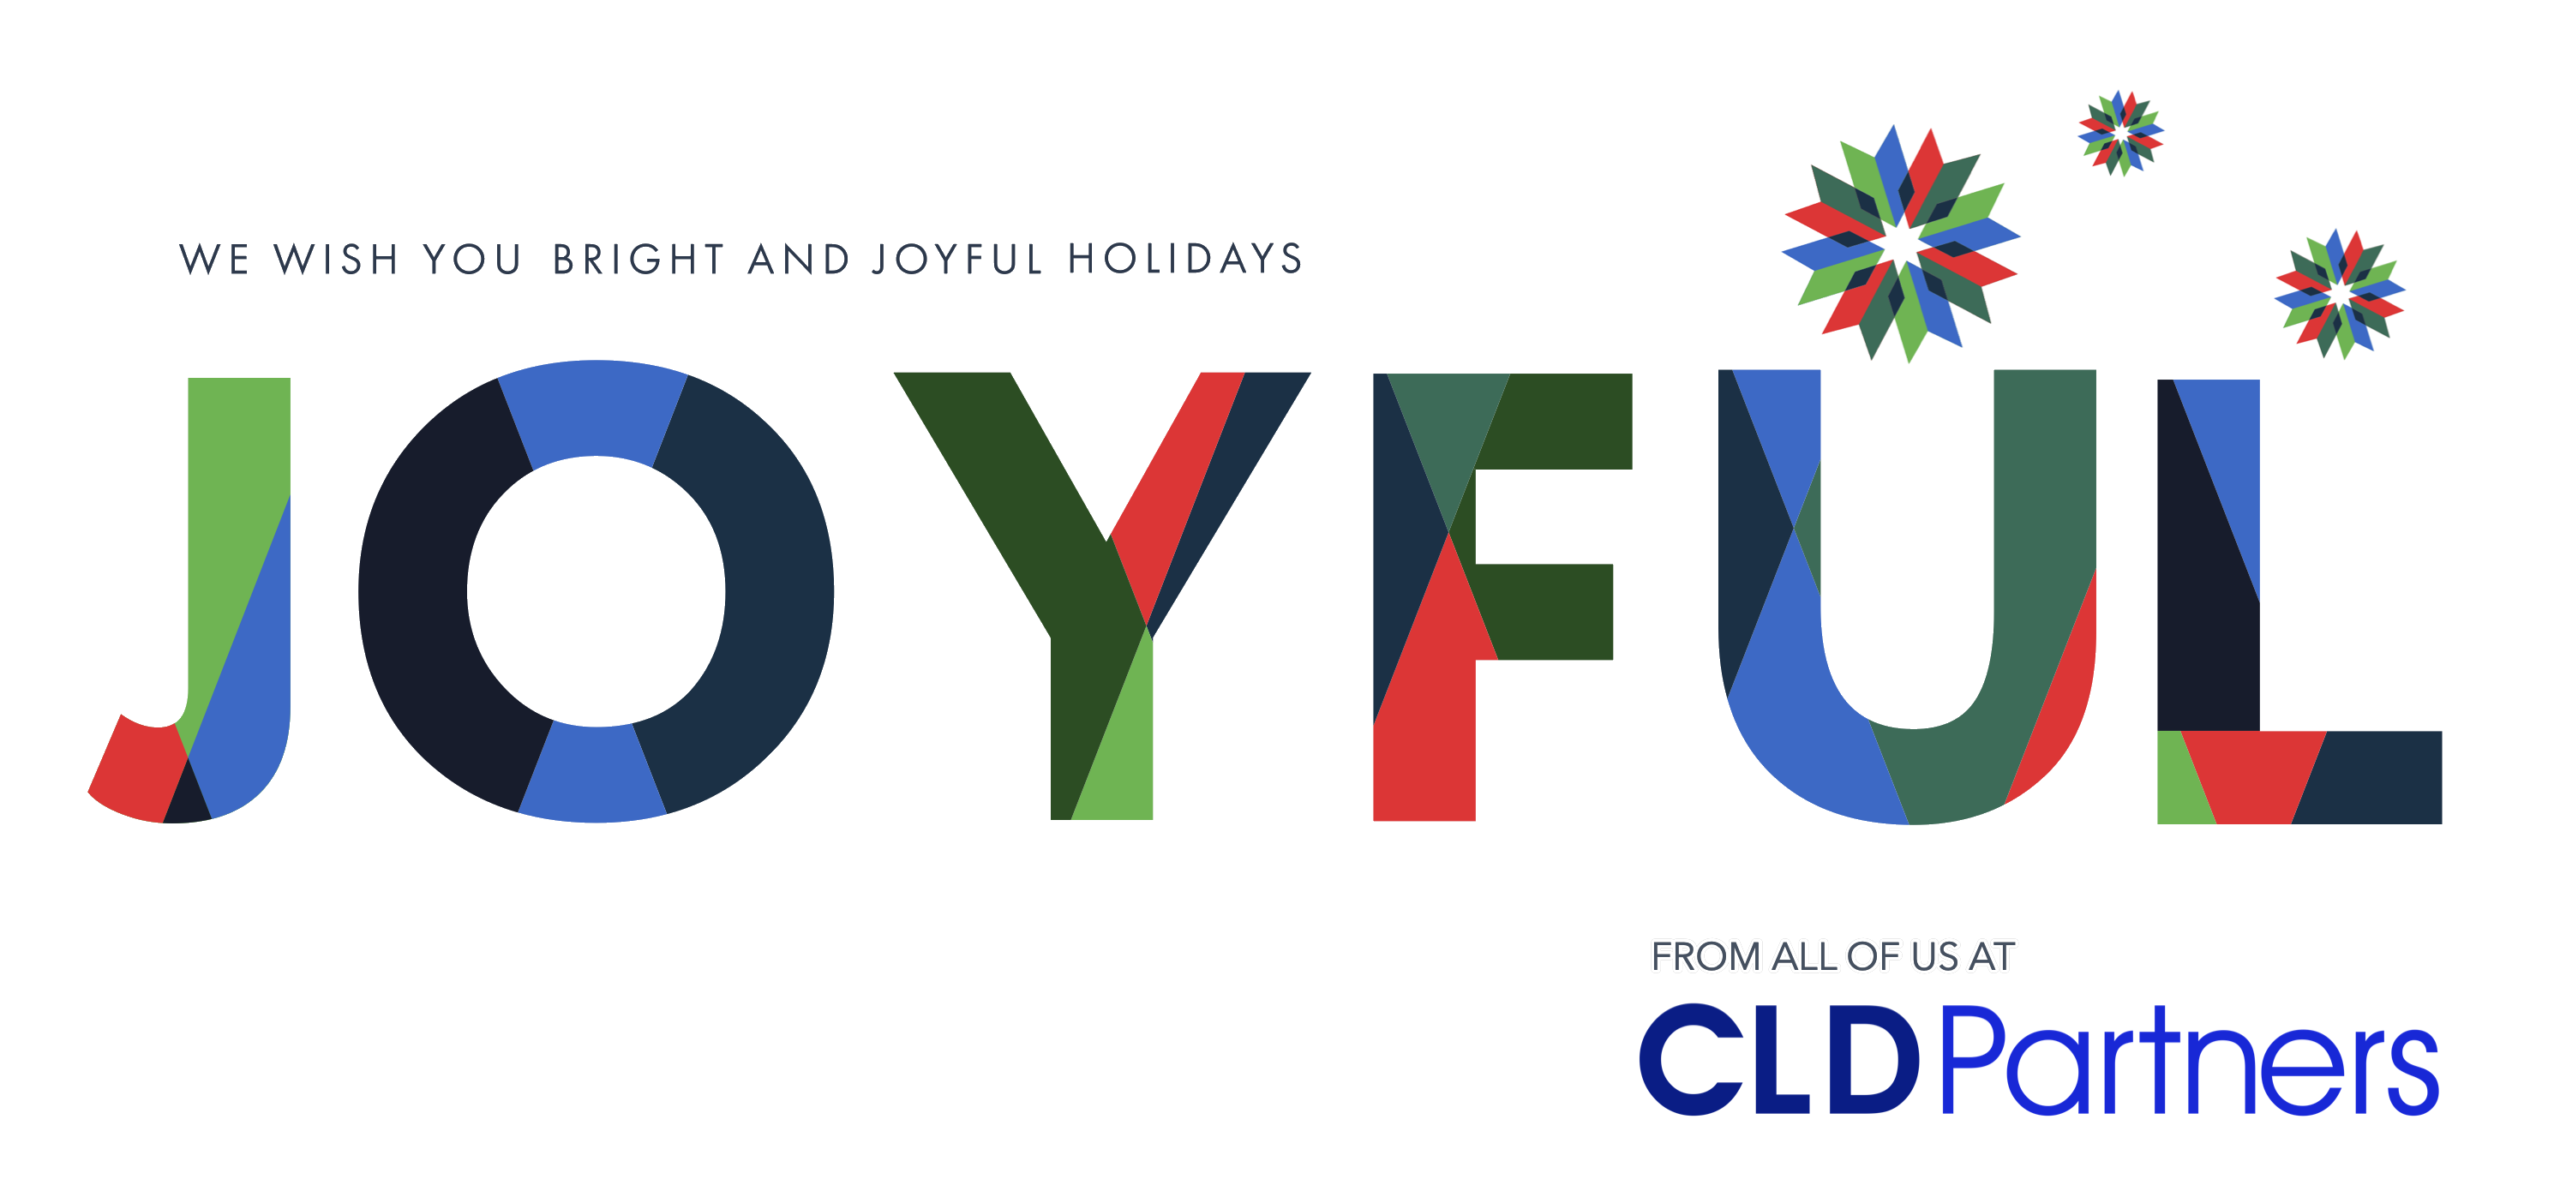 Merry Christmas and Happy Holidays from CLD Partners - a leading FinancialForce Implementation partner